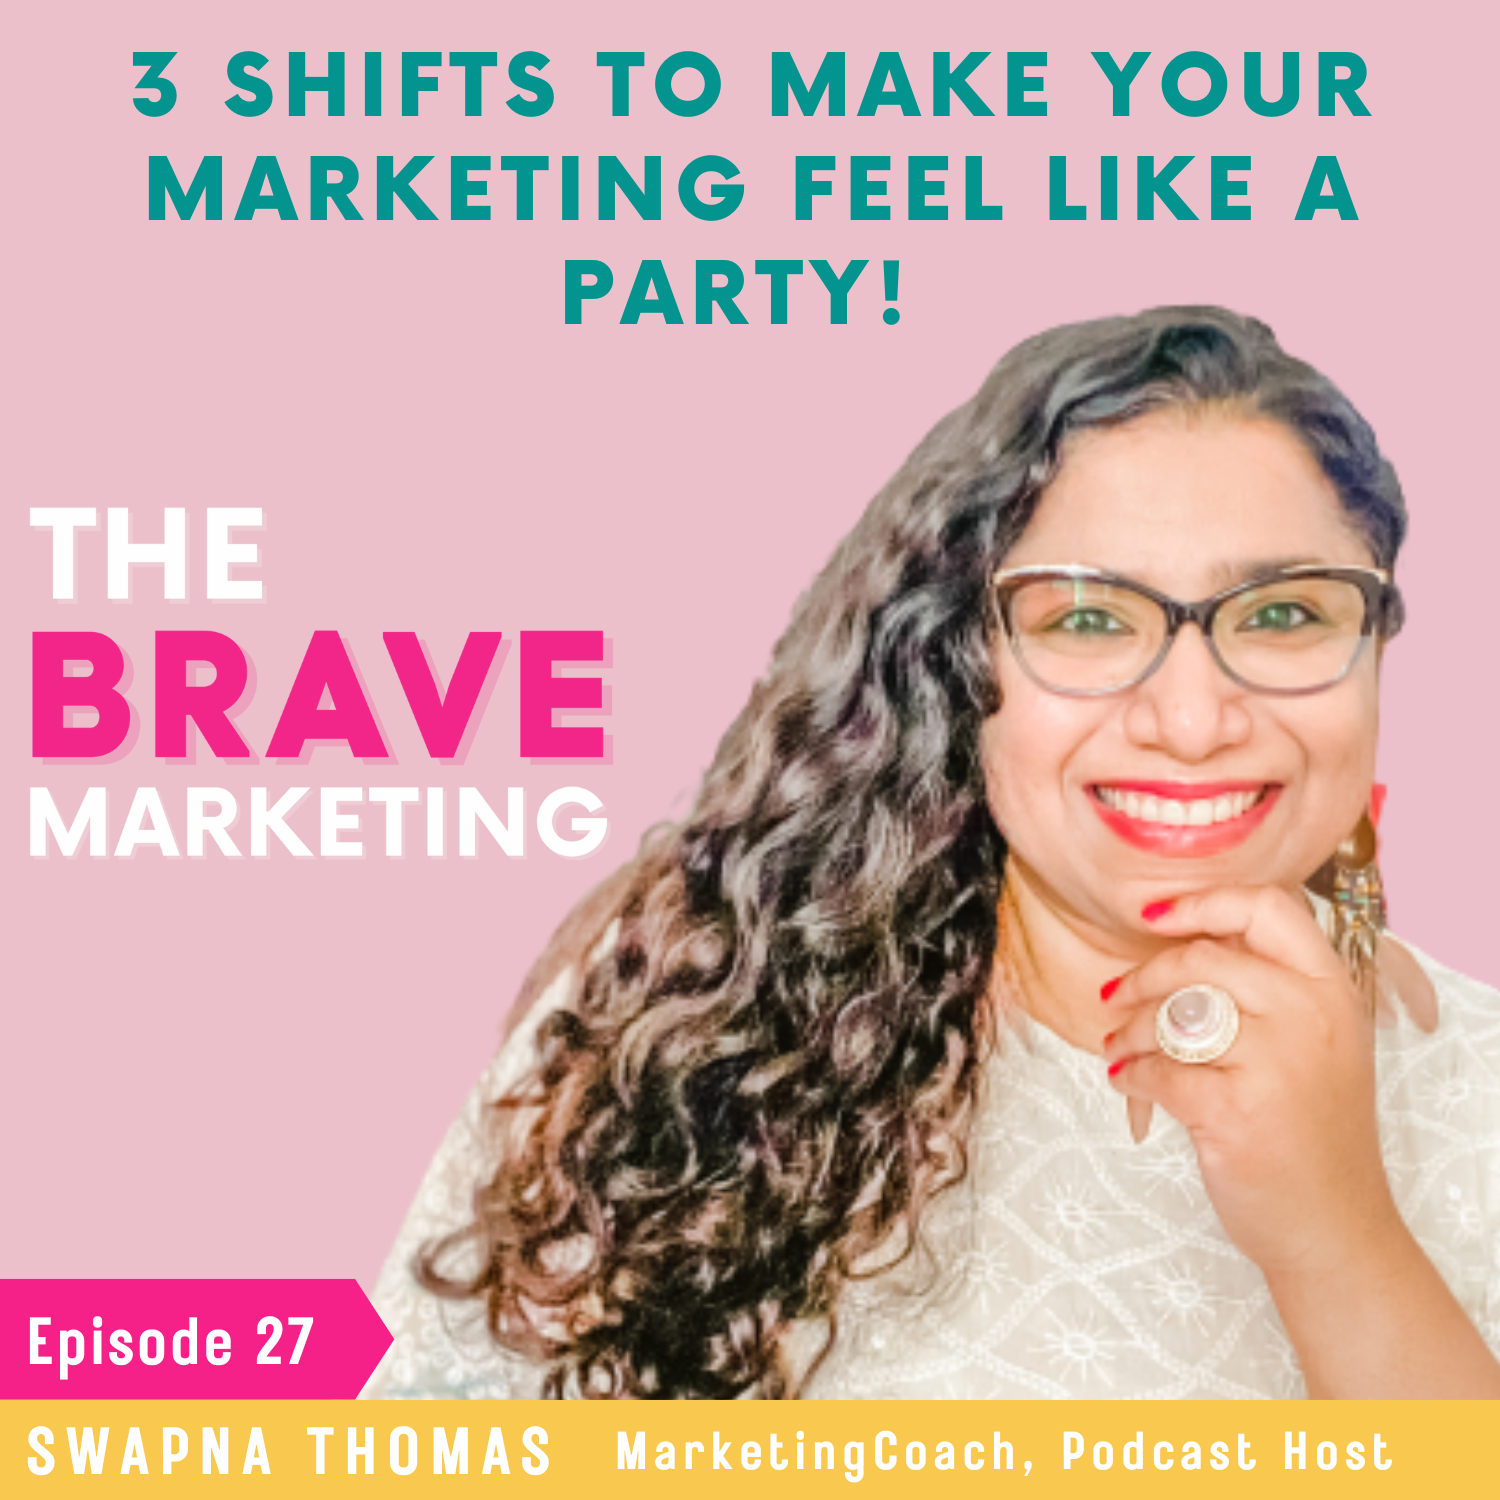 3 Shifts To Make Your Marketing Feel Like A Party!